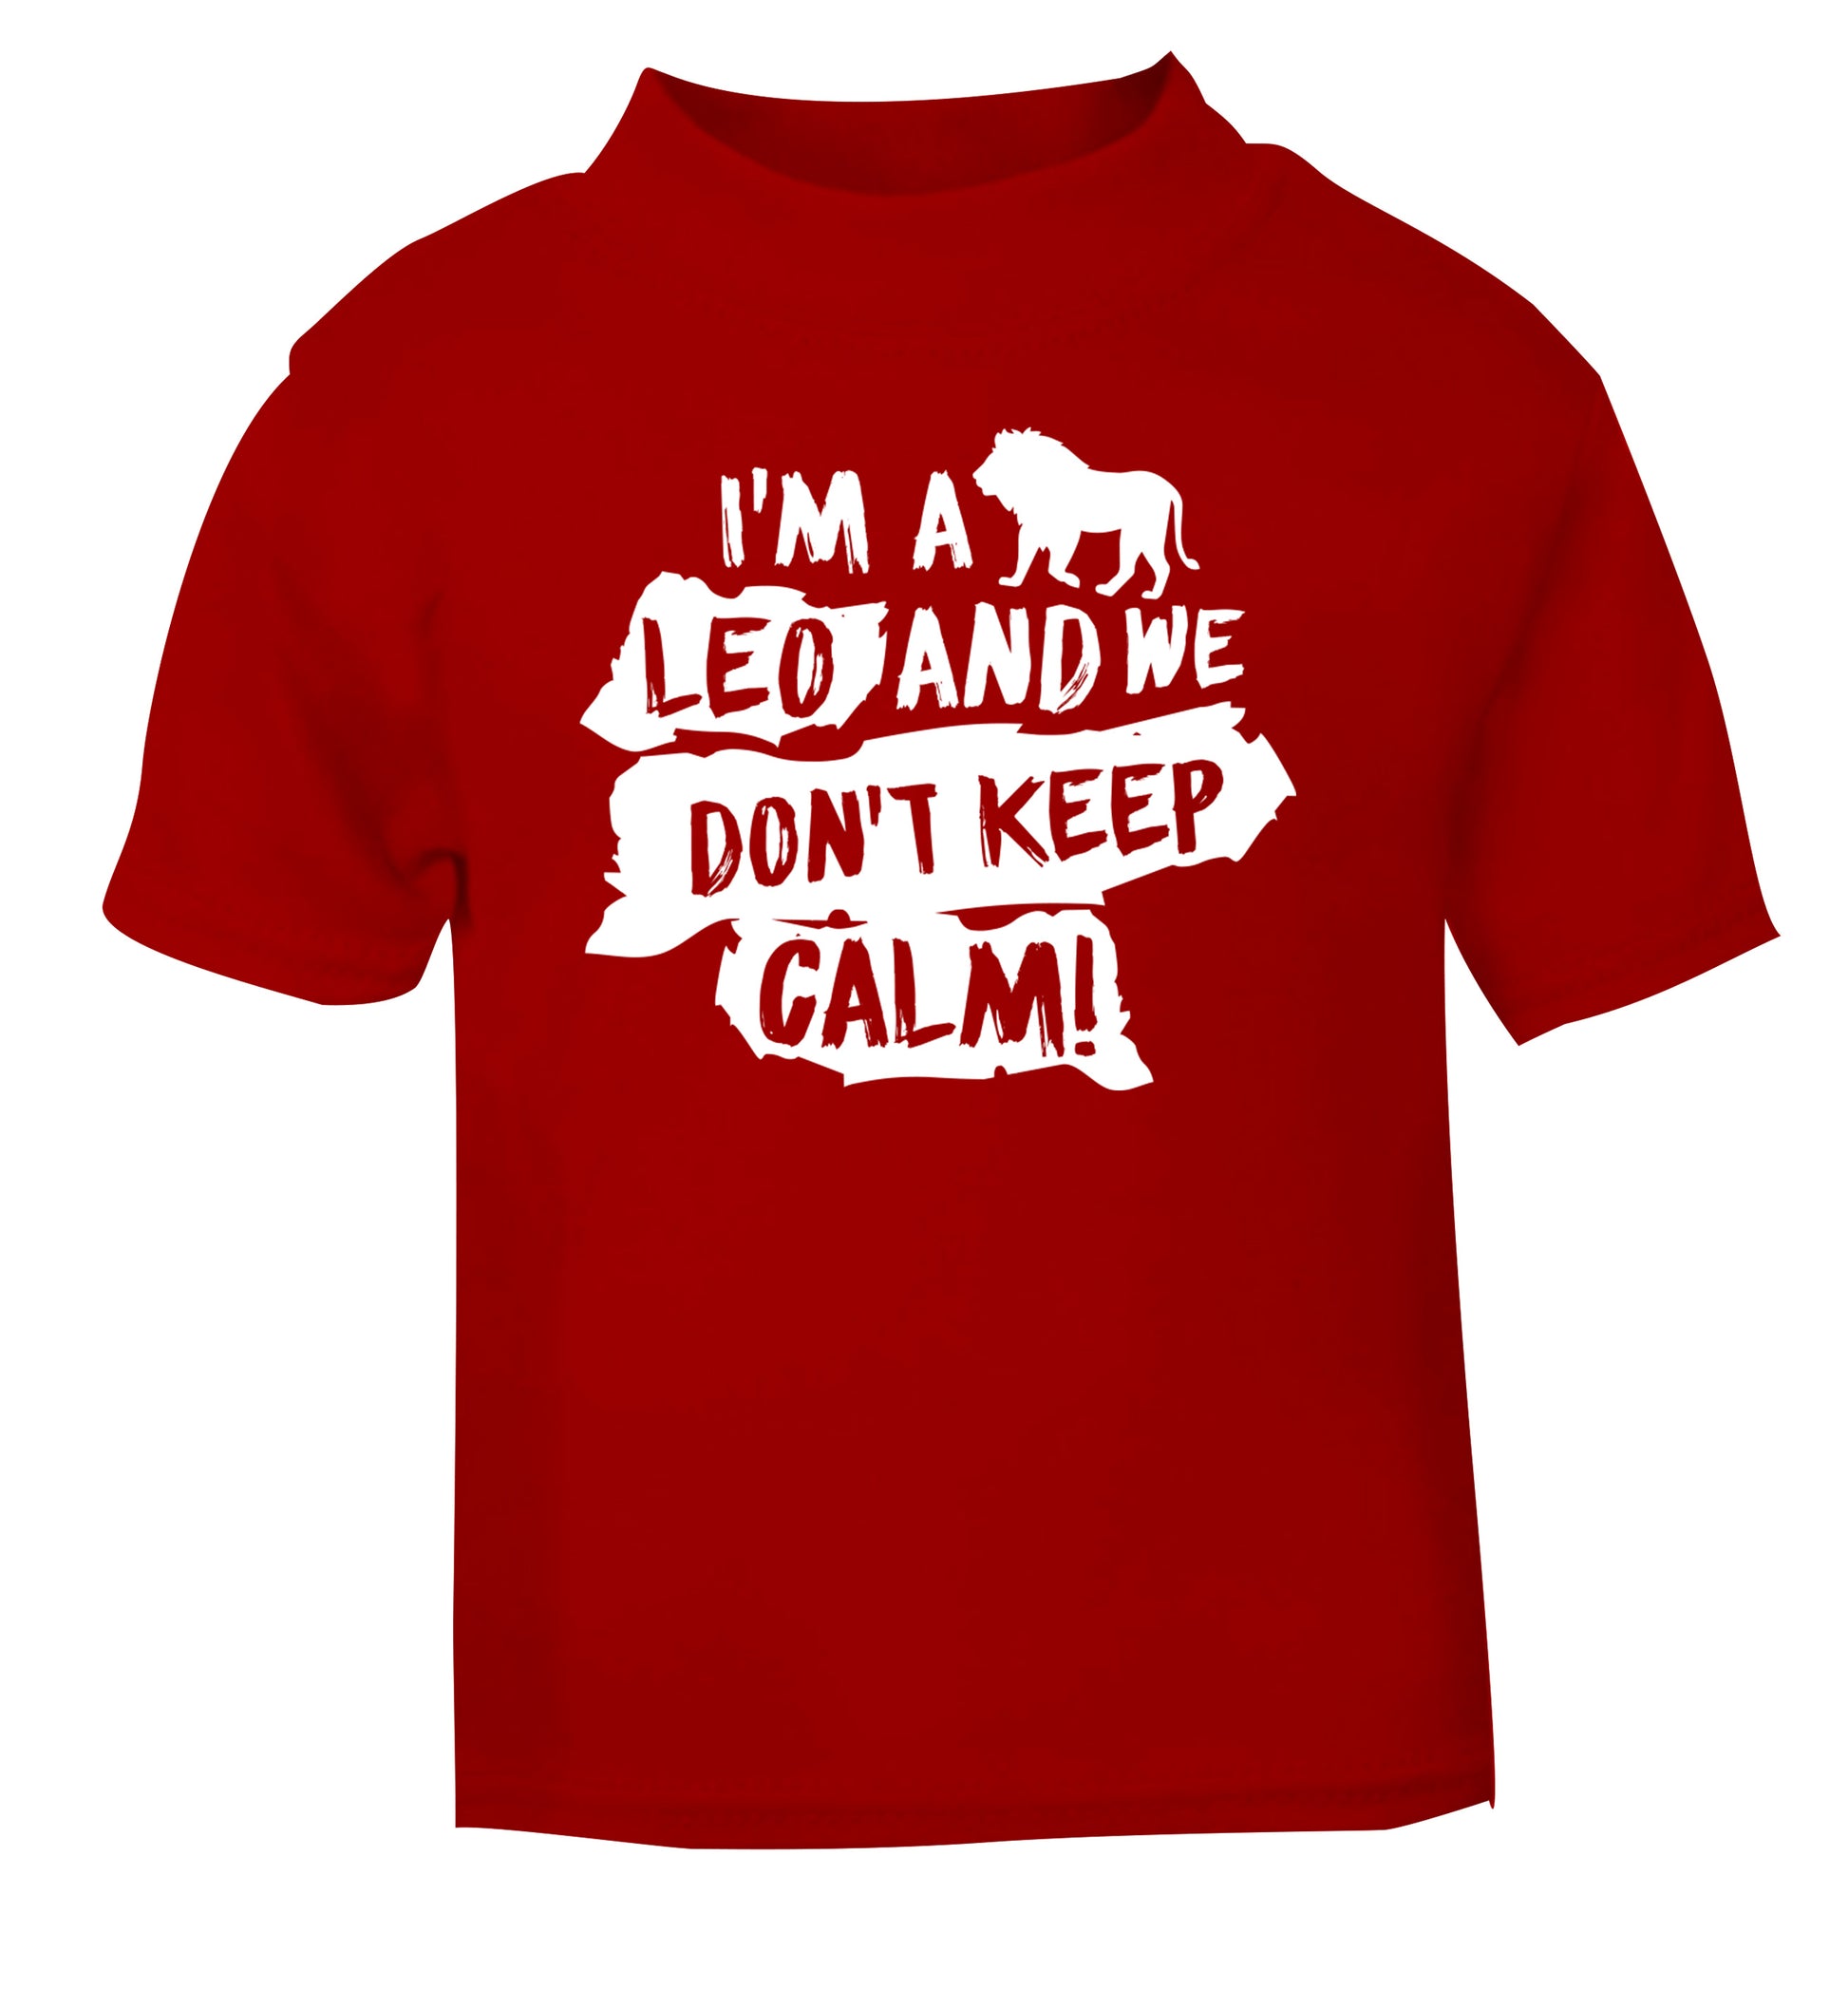 I'm a leo and we don't keep calm! red Baby Toddler Tshirt 2 Years